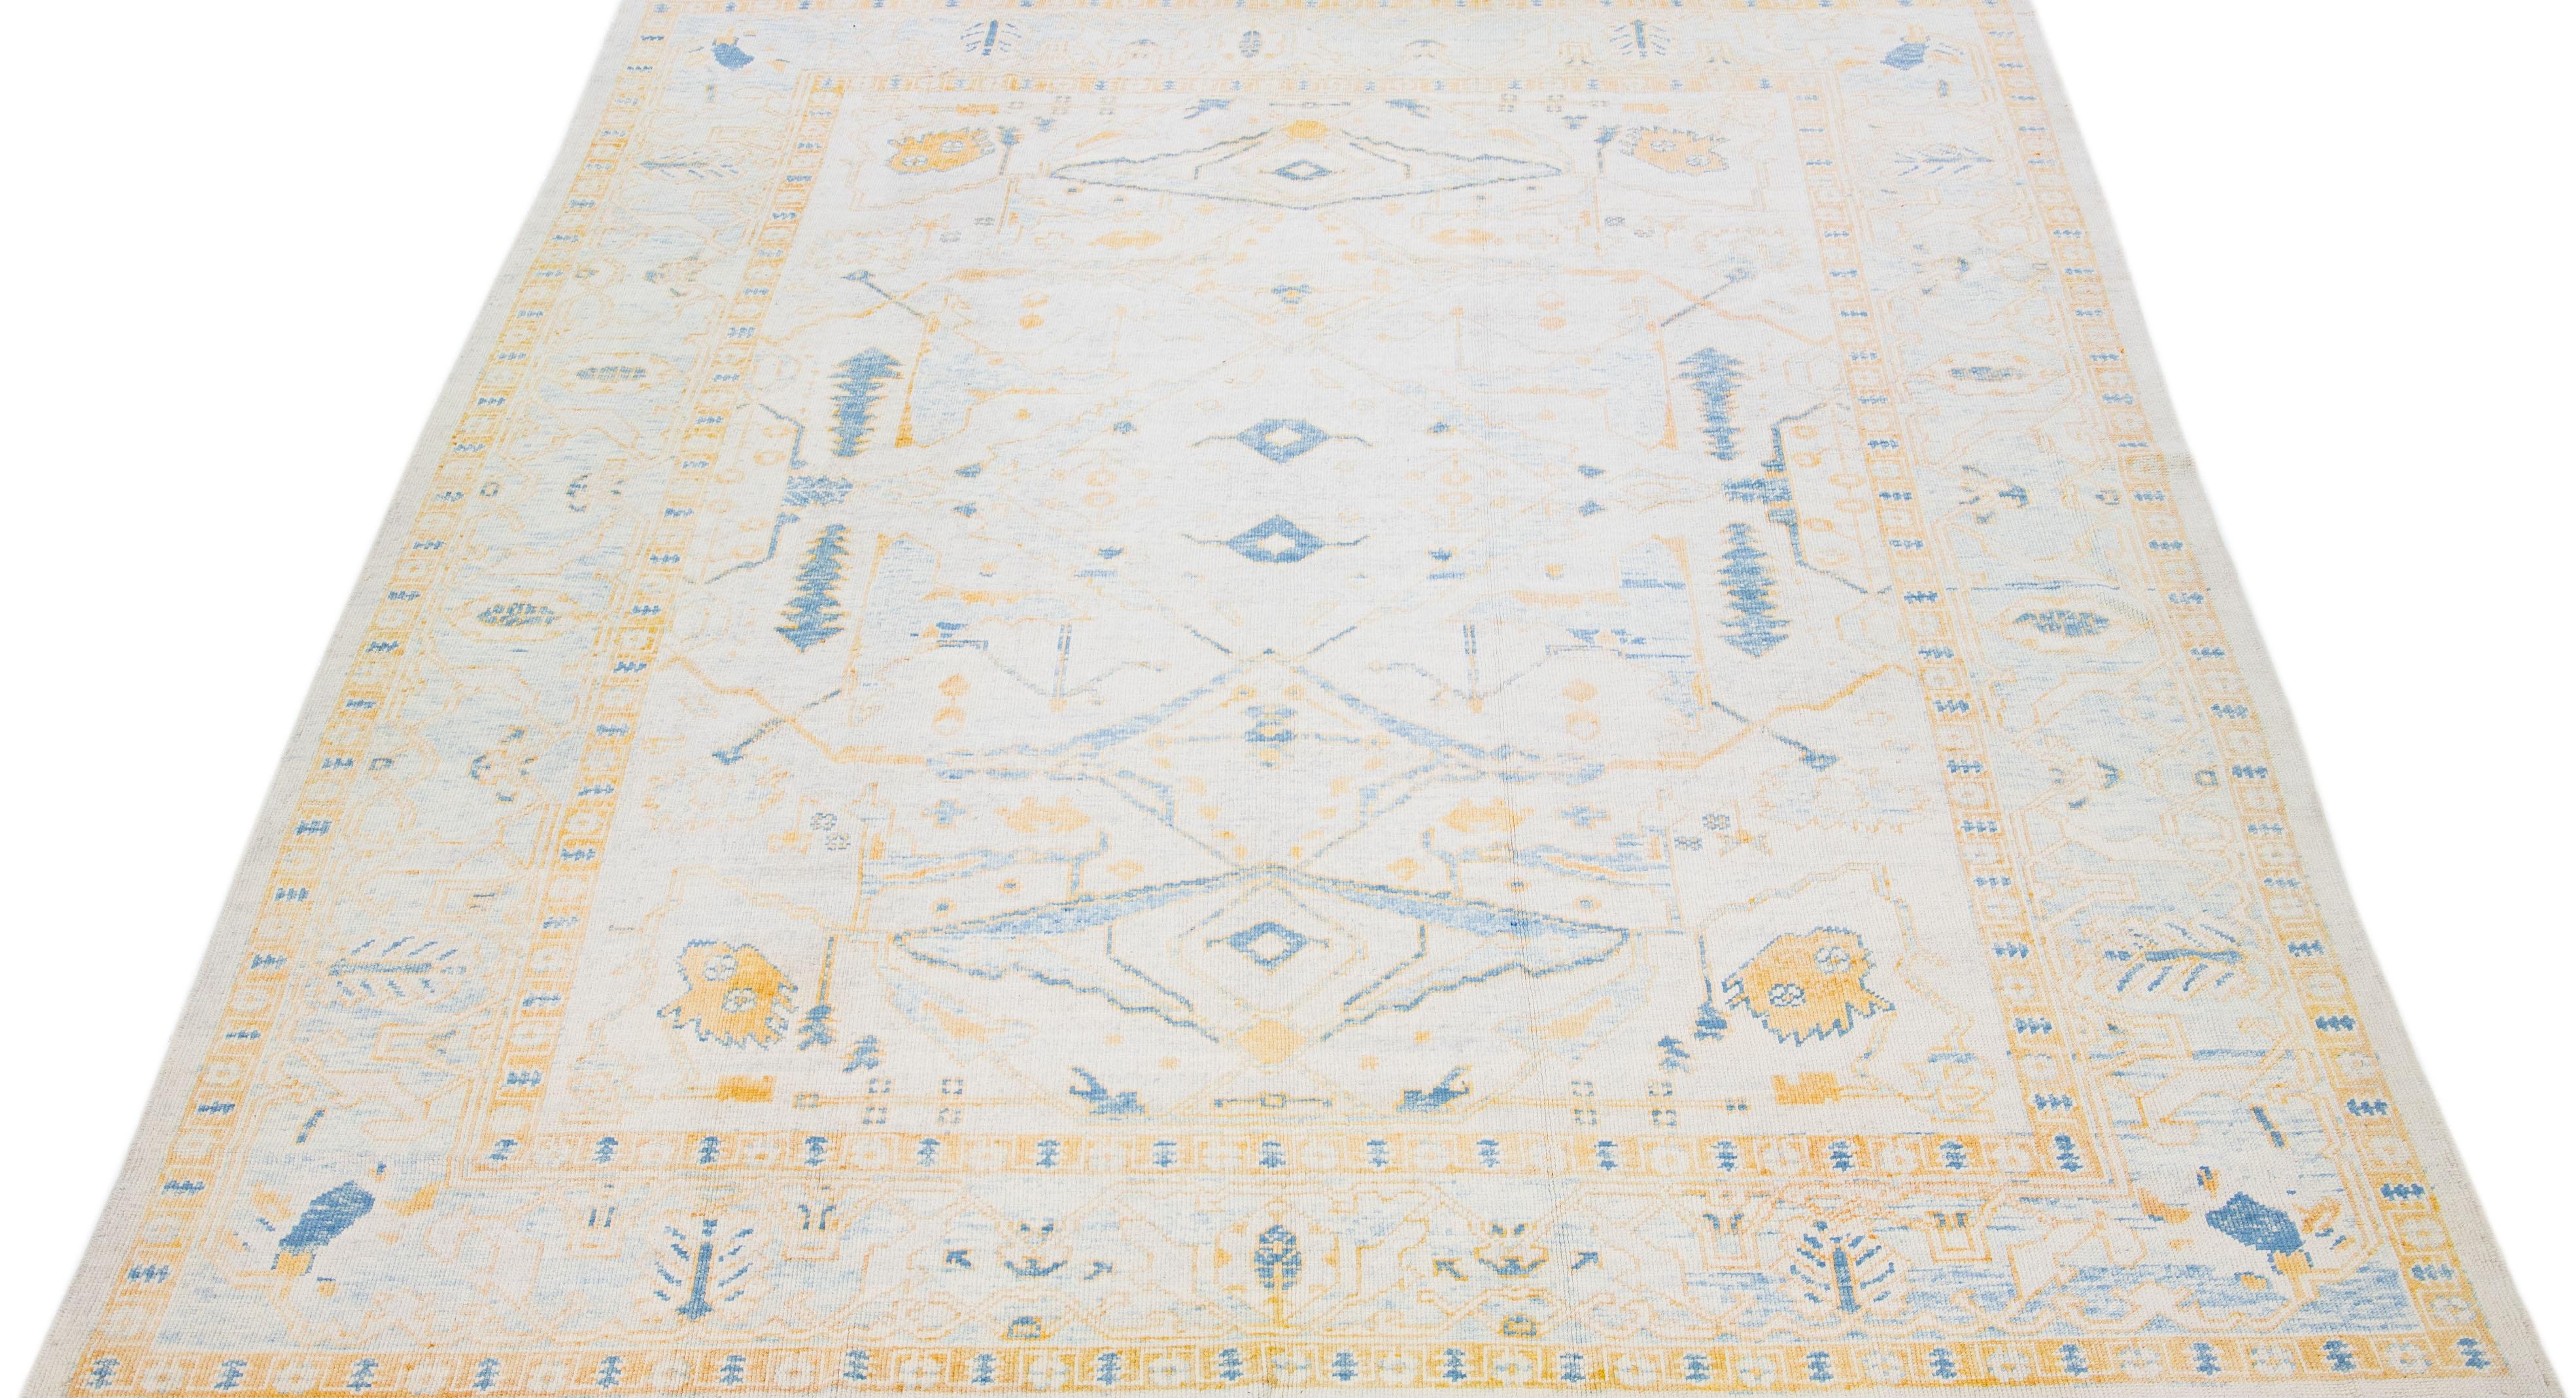 Beautiful modern Oushak hand-knotted wool rug with a beige color field. This Turkish Piece has blue and orange accent colors in a gorgeous all-over floral design.

This rug measures: 10'2